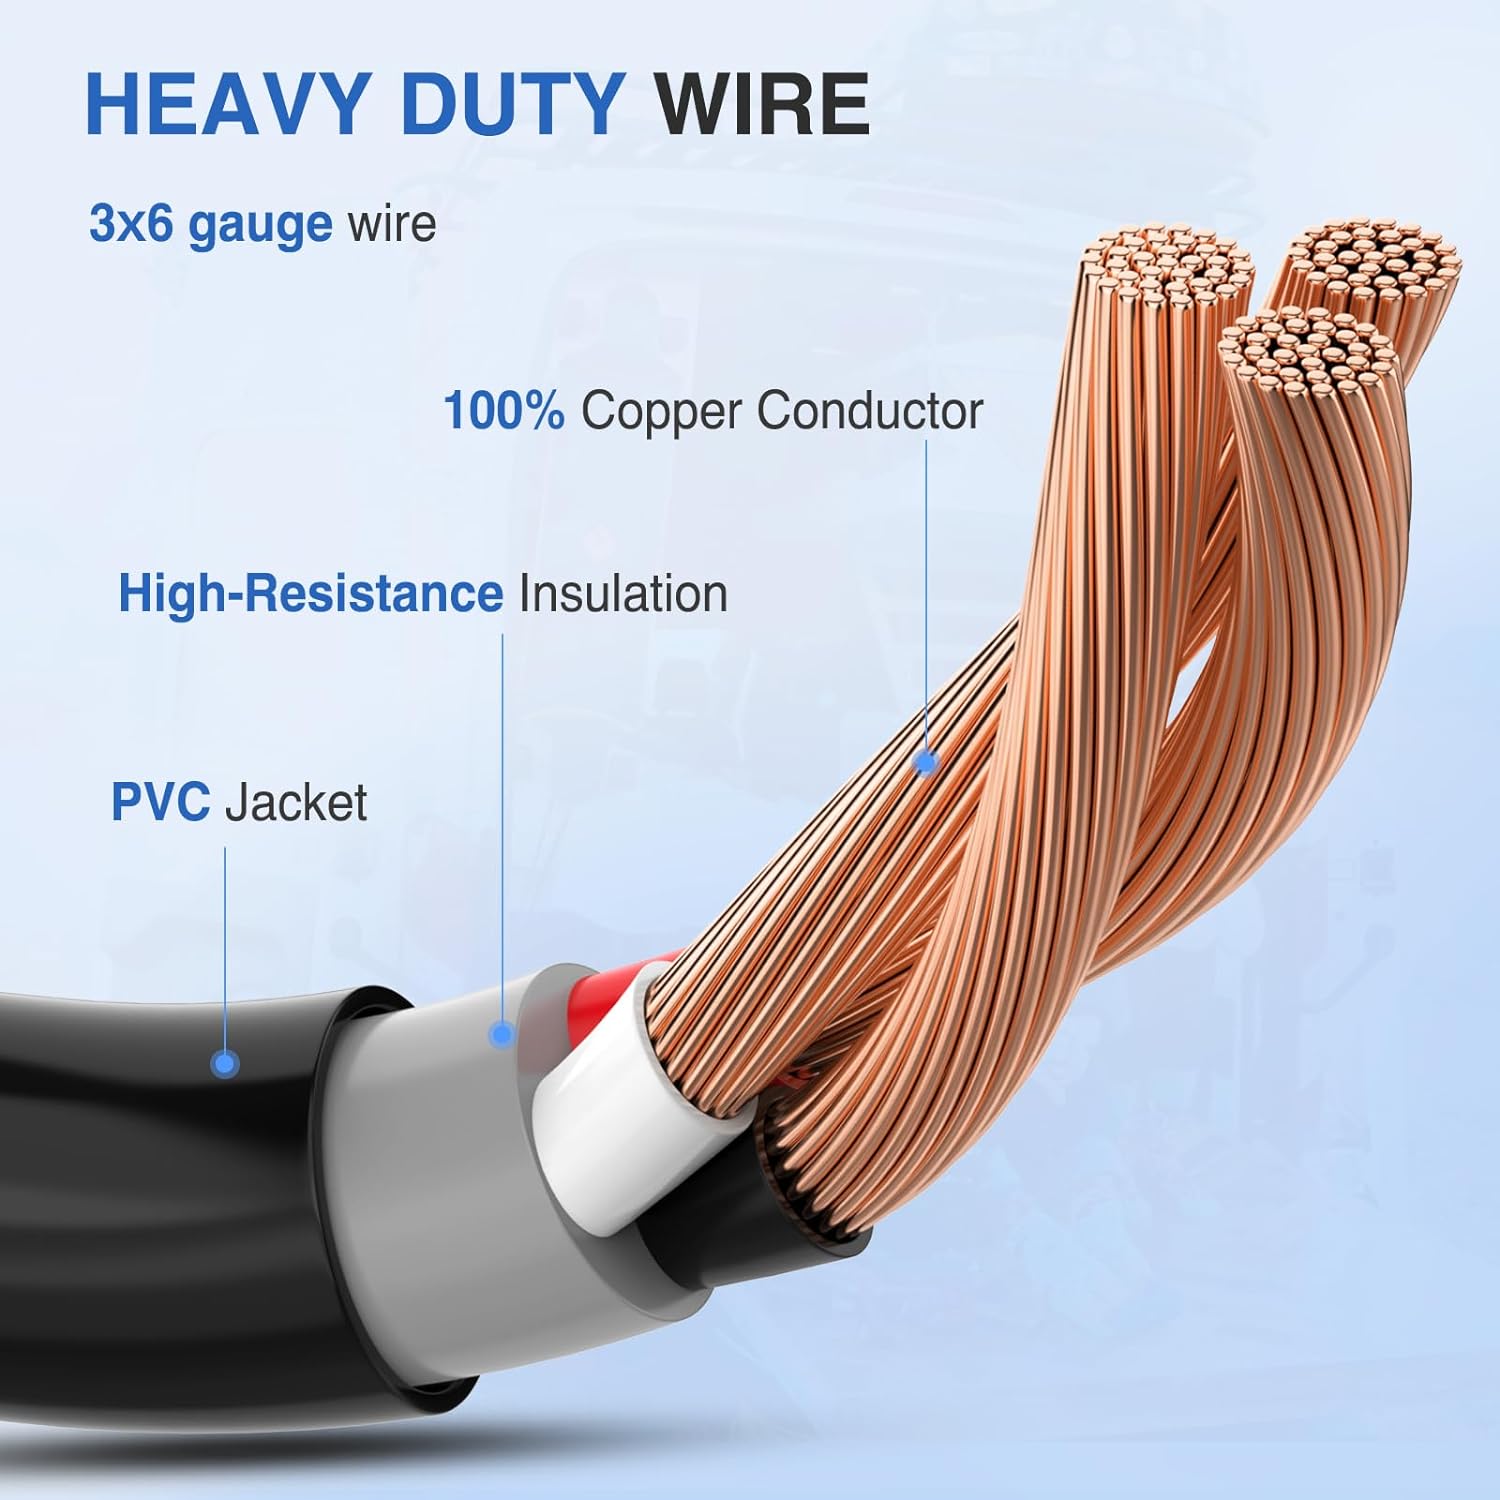 RV Parts EV Charger Adapter Cord 50 Amp to 50 Amp 4 Prong Pure Copper 250V Welder Outlet to EV Plug Conversion Heavy Duty 10 Gauge Wire 6-50P to 14-50R 50M/50F